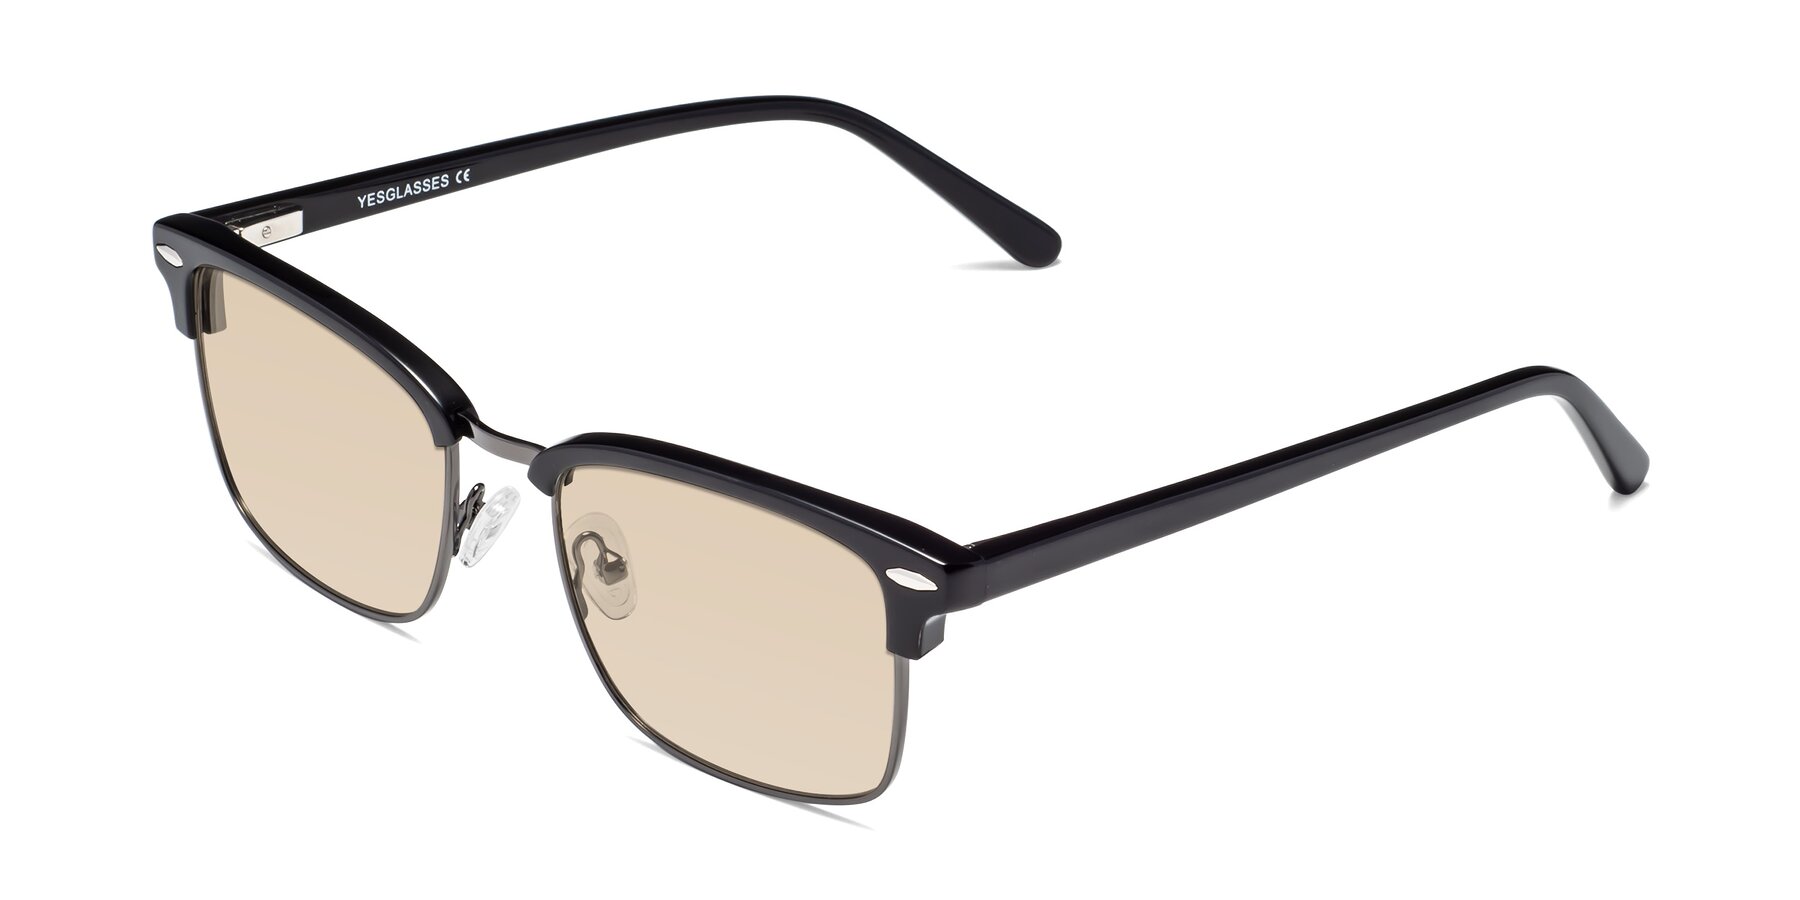 Angle of 17464 in Black-Gunmetal with Light Brown Tinted Lenses